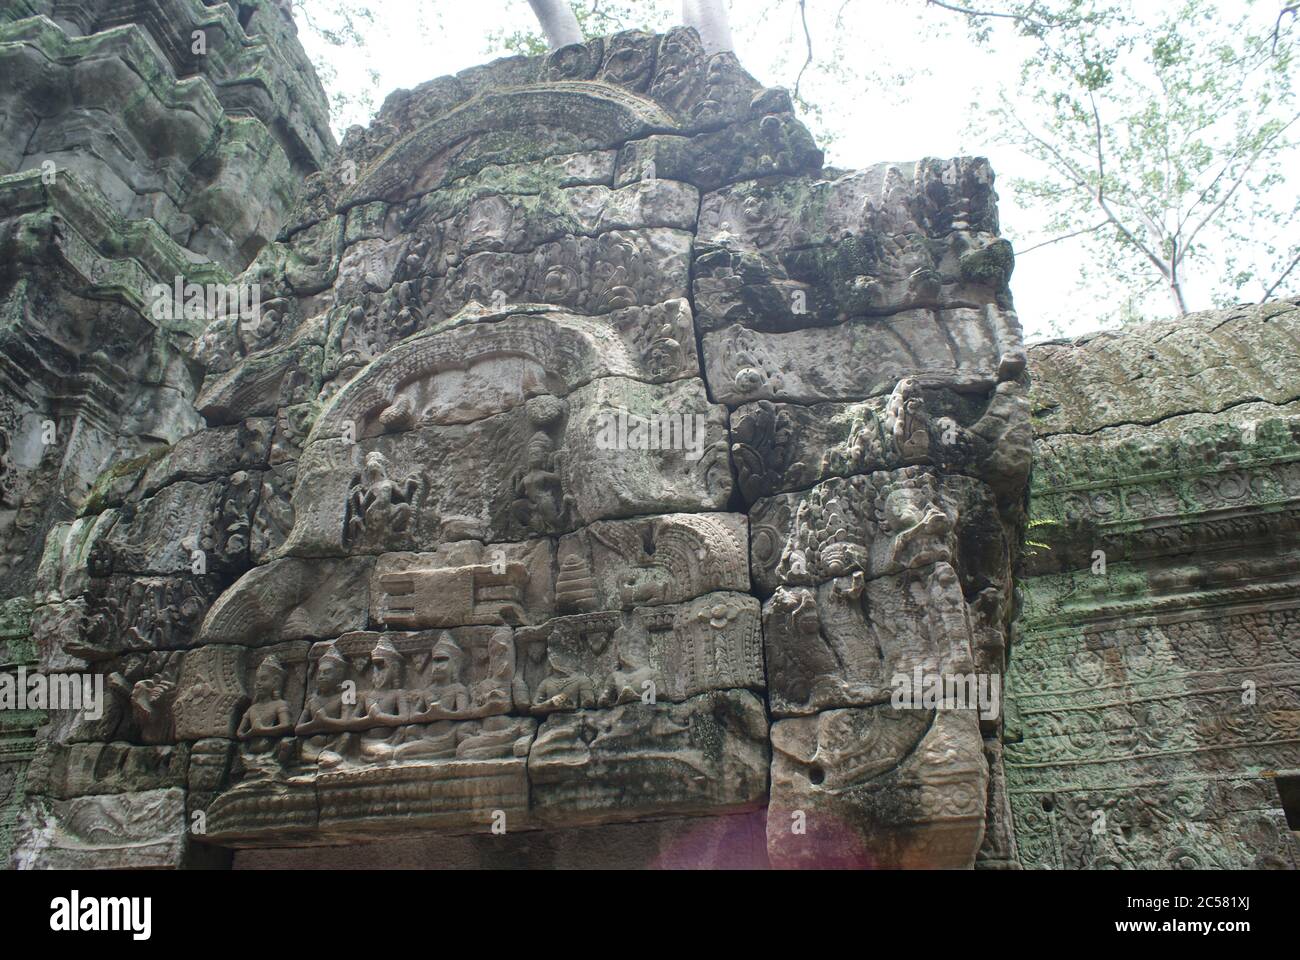 Very old and huge city Angkor Wat in Cambodia, state Siem Reap. Amazing stone buildings, a lot of green and fantastic architecture. Antic. Stock Photo